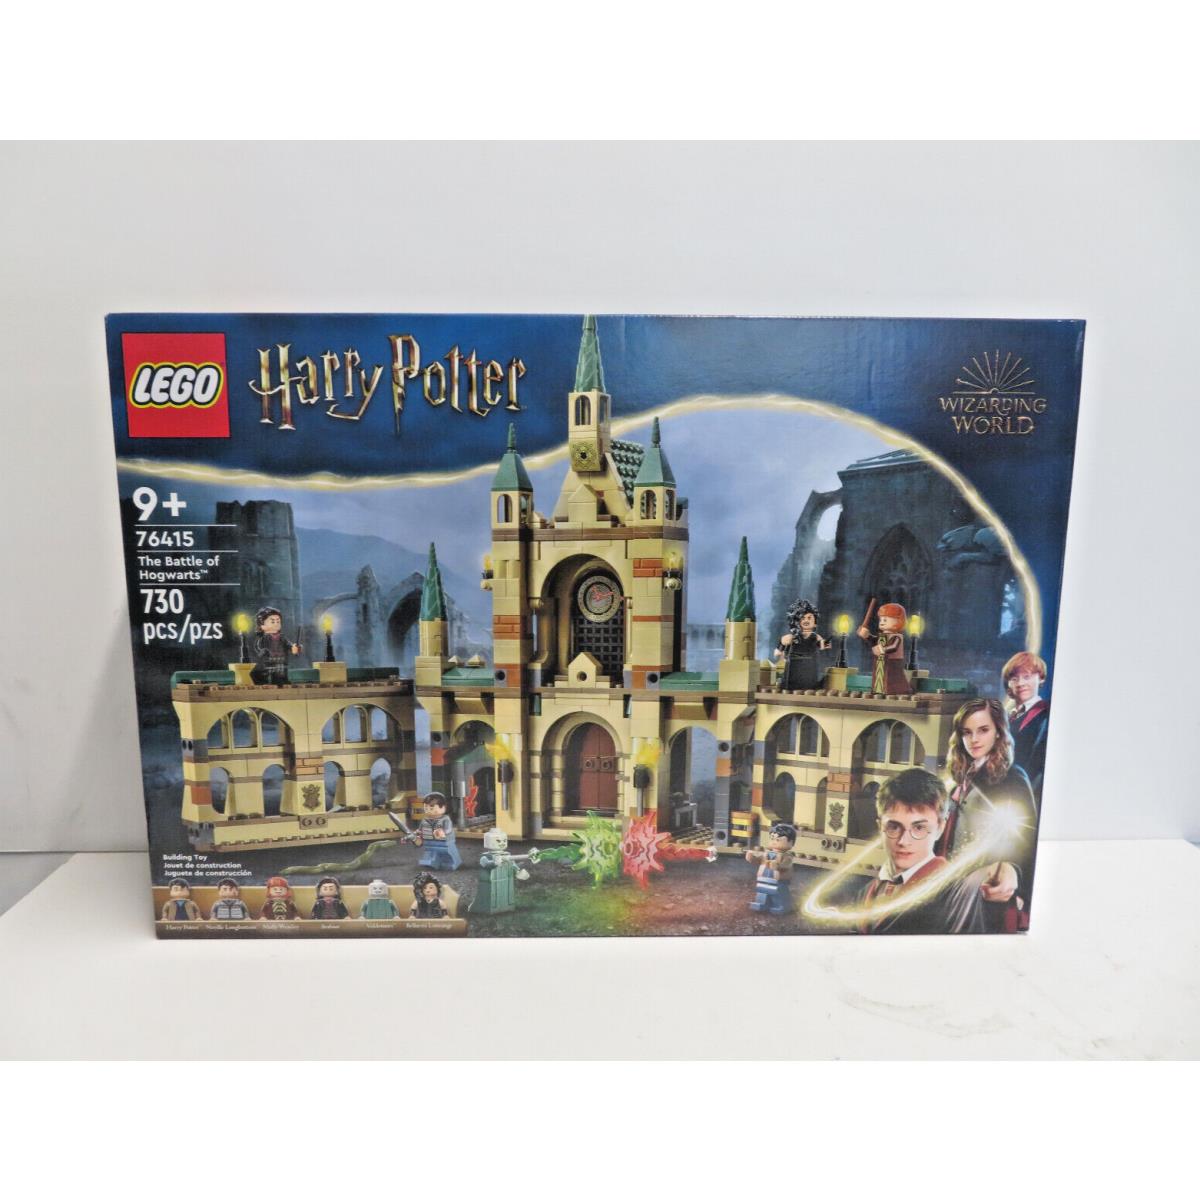 Lego Harry Potter 76415 The Battle of Hogwarts 730 Pieces